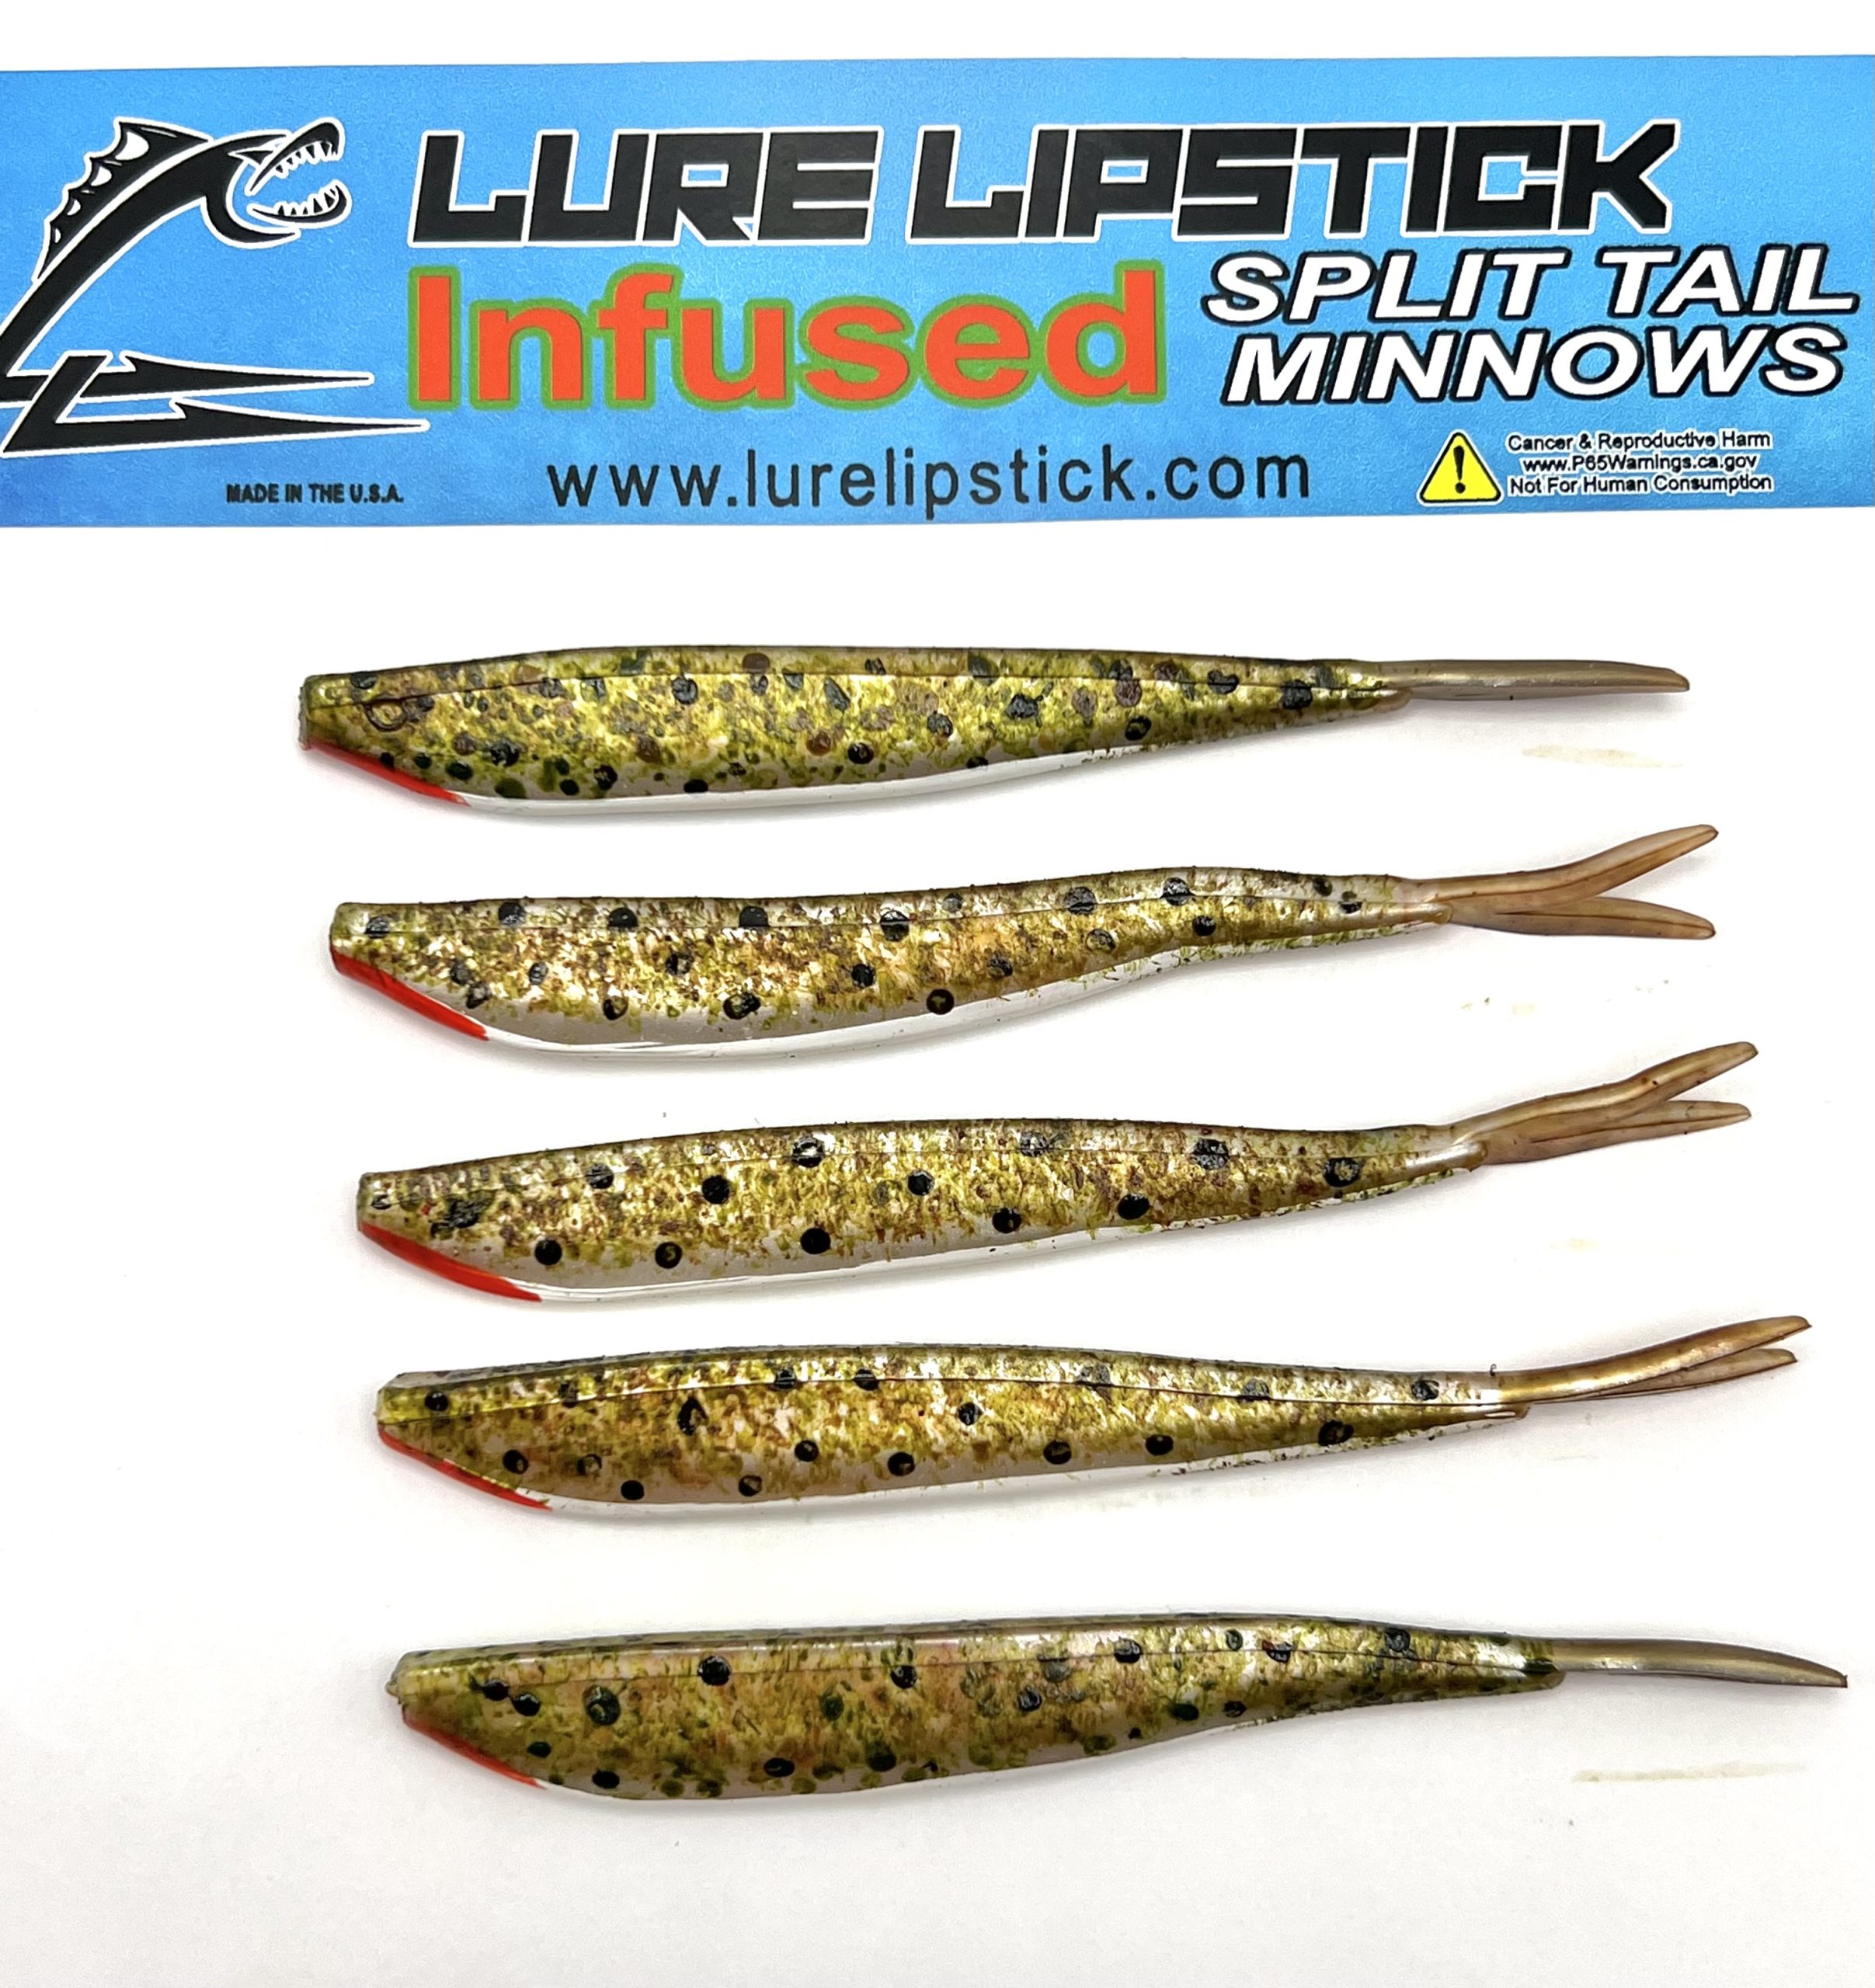 4 INCH 5 PACK CUSTOM SPLIT TAIL MINNOW – GOBY NATURAL TAIL – Lure